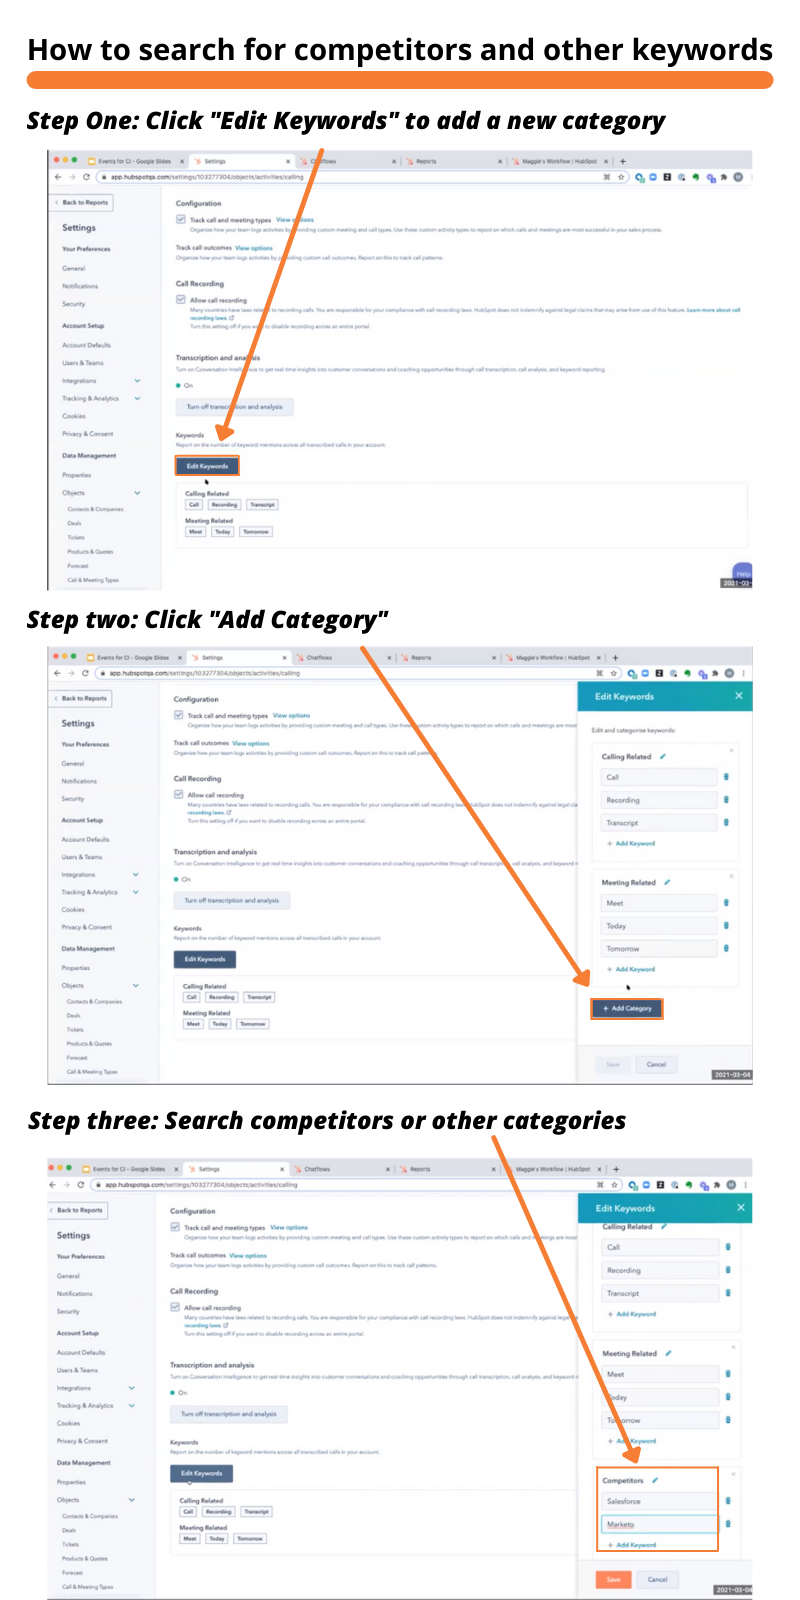 How to Search for competitors and keywords (1)